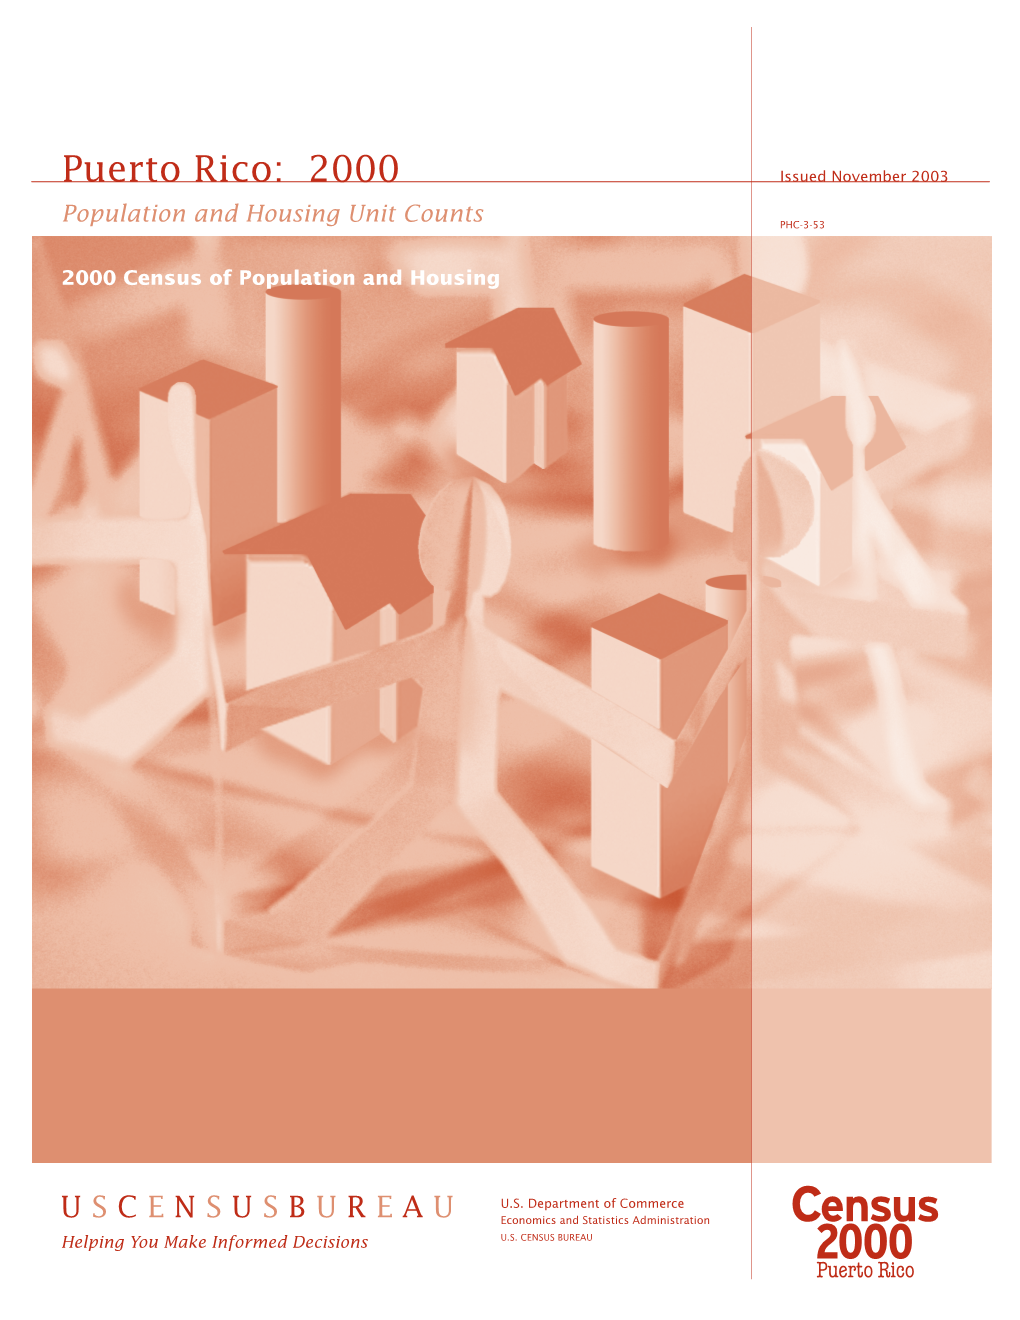 Population and Housing Unit Counts, Puerto Rico: 2000